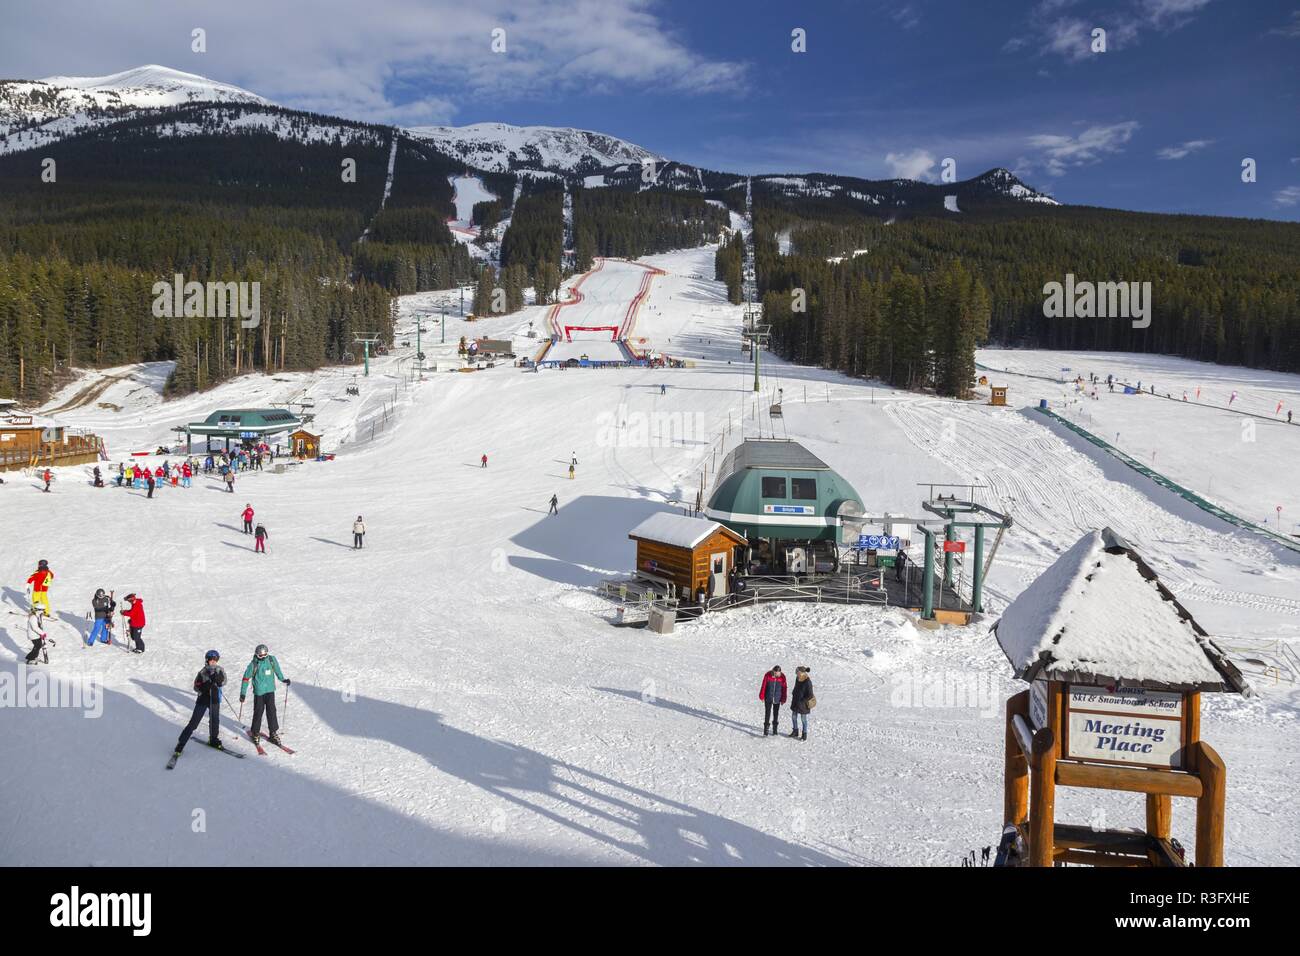 Downhill Alpine Skiing Finish Line, Groomed Snow Slopes at Famous Lake Louise Ski Area. Banff National Park, Alberta Canada Rocky Mountains Winter Stock Photo